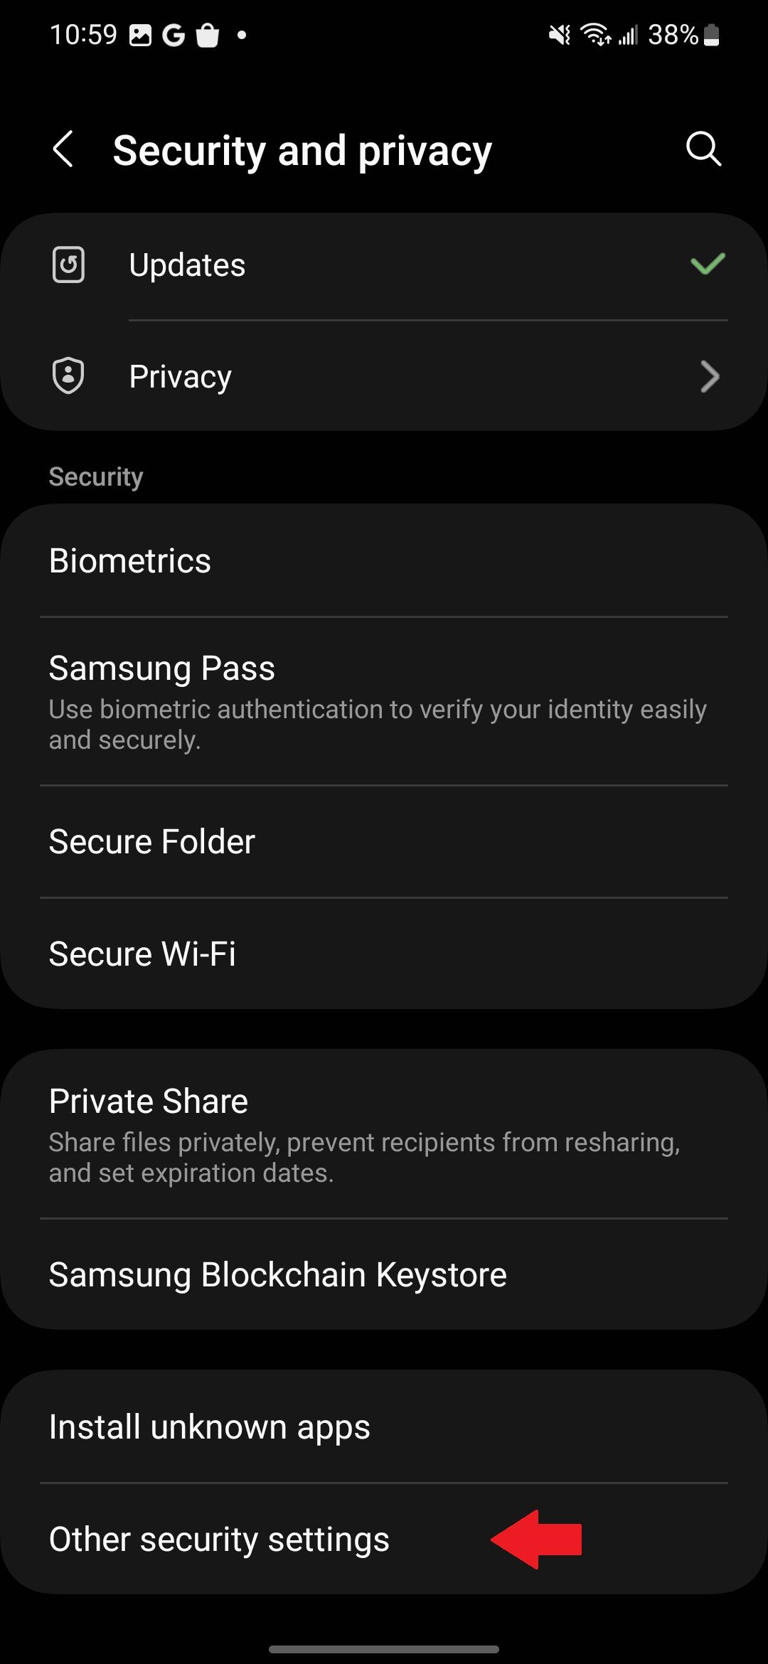 Security and privacy settings on a Samsung phone with a red arrow pointing to the Other security settings option